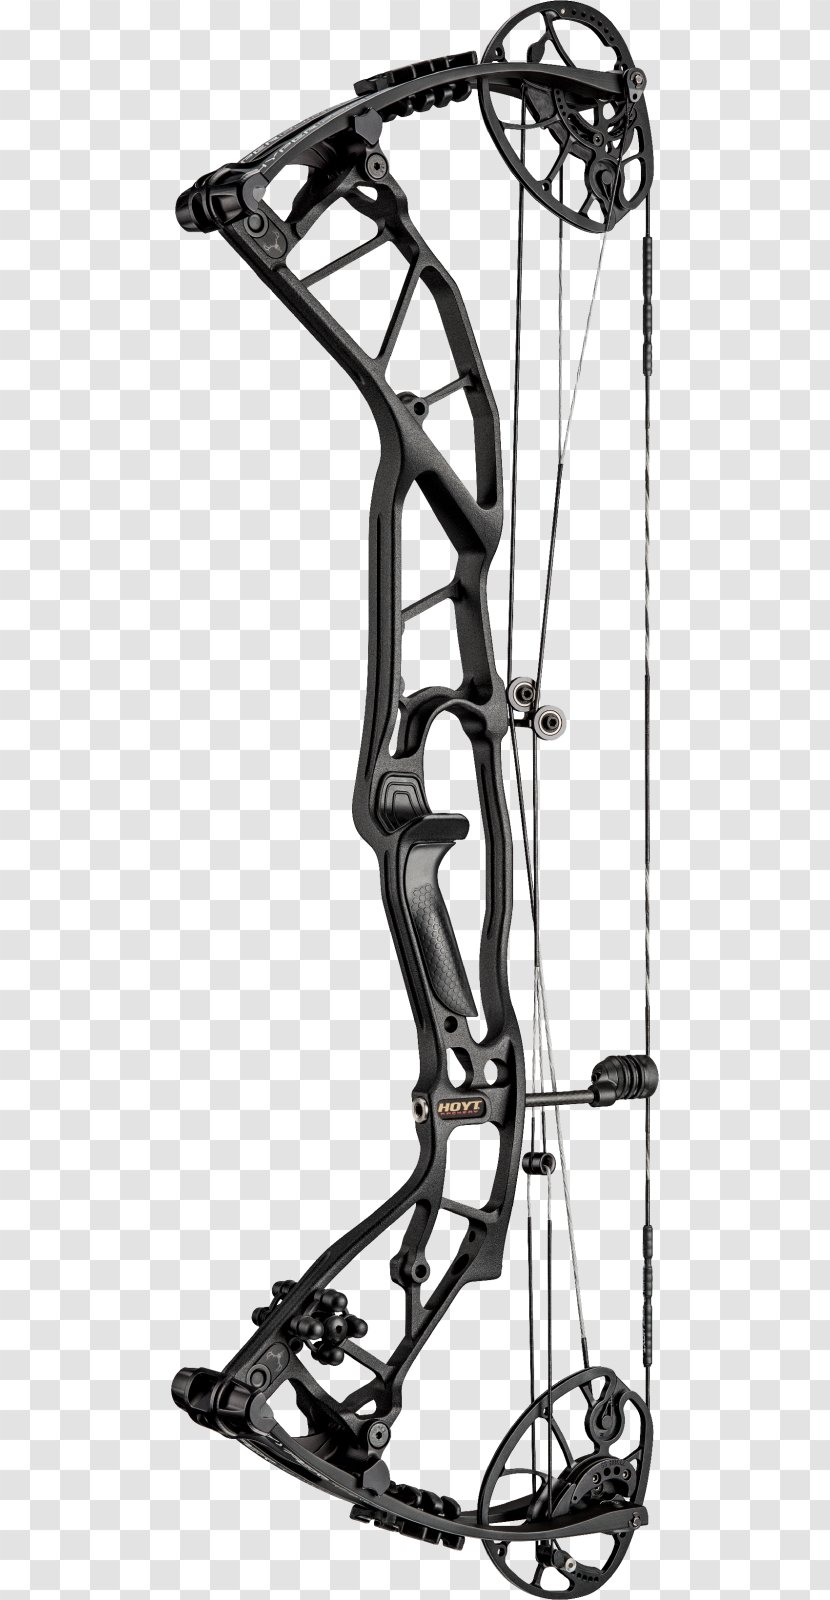 Compound Bows Bow And Arrow Archery Bowhunting - Sports Equipment Transparent PNG